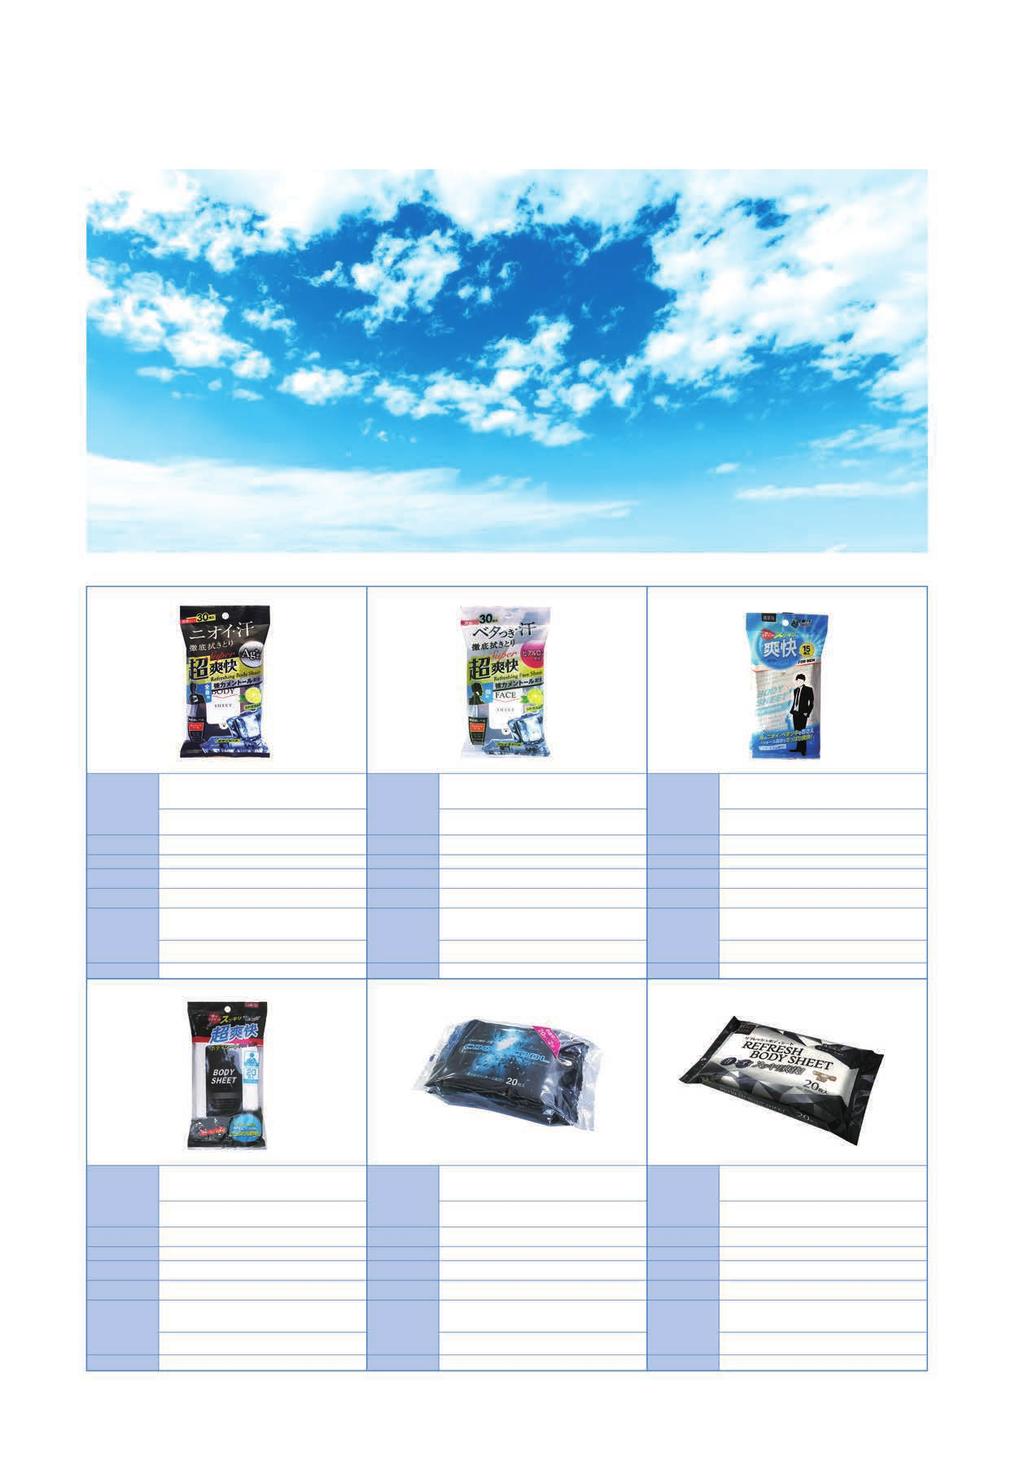 Seasonal 季节性产品 Life Care s Cleaning s Nursing Care s Baby Care s The body refreshing wipes which can deodorize and sanitize anywhere and anytime are essential items for summer!